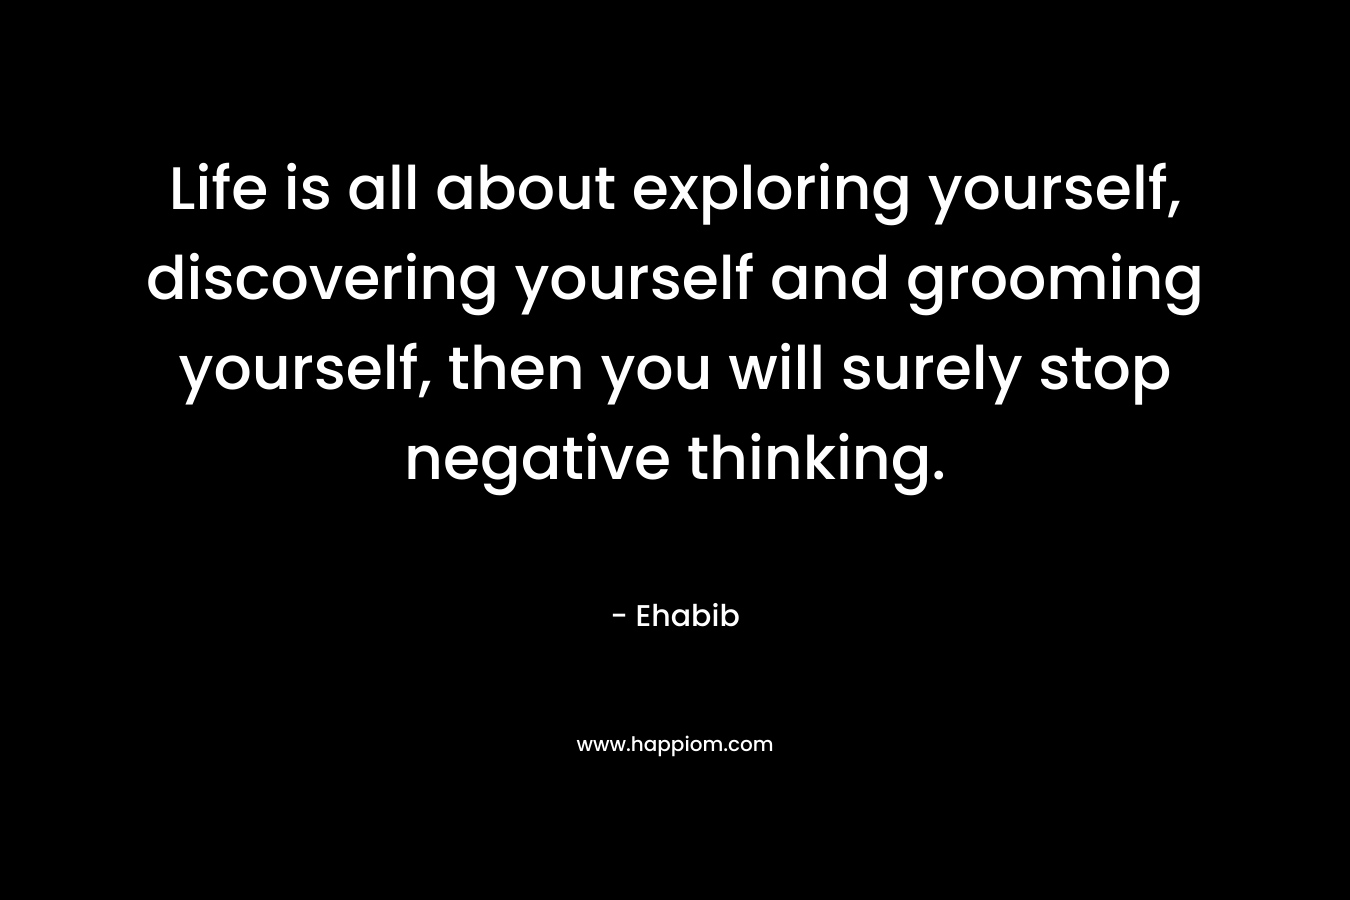 Life is all about exploring yourself, discovering yourself and grooming yourself, then you will surely stop negative thinking. – Ehabib